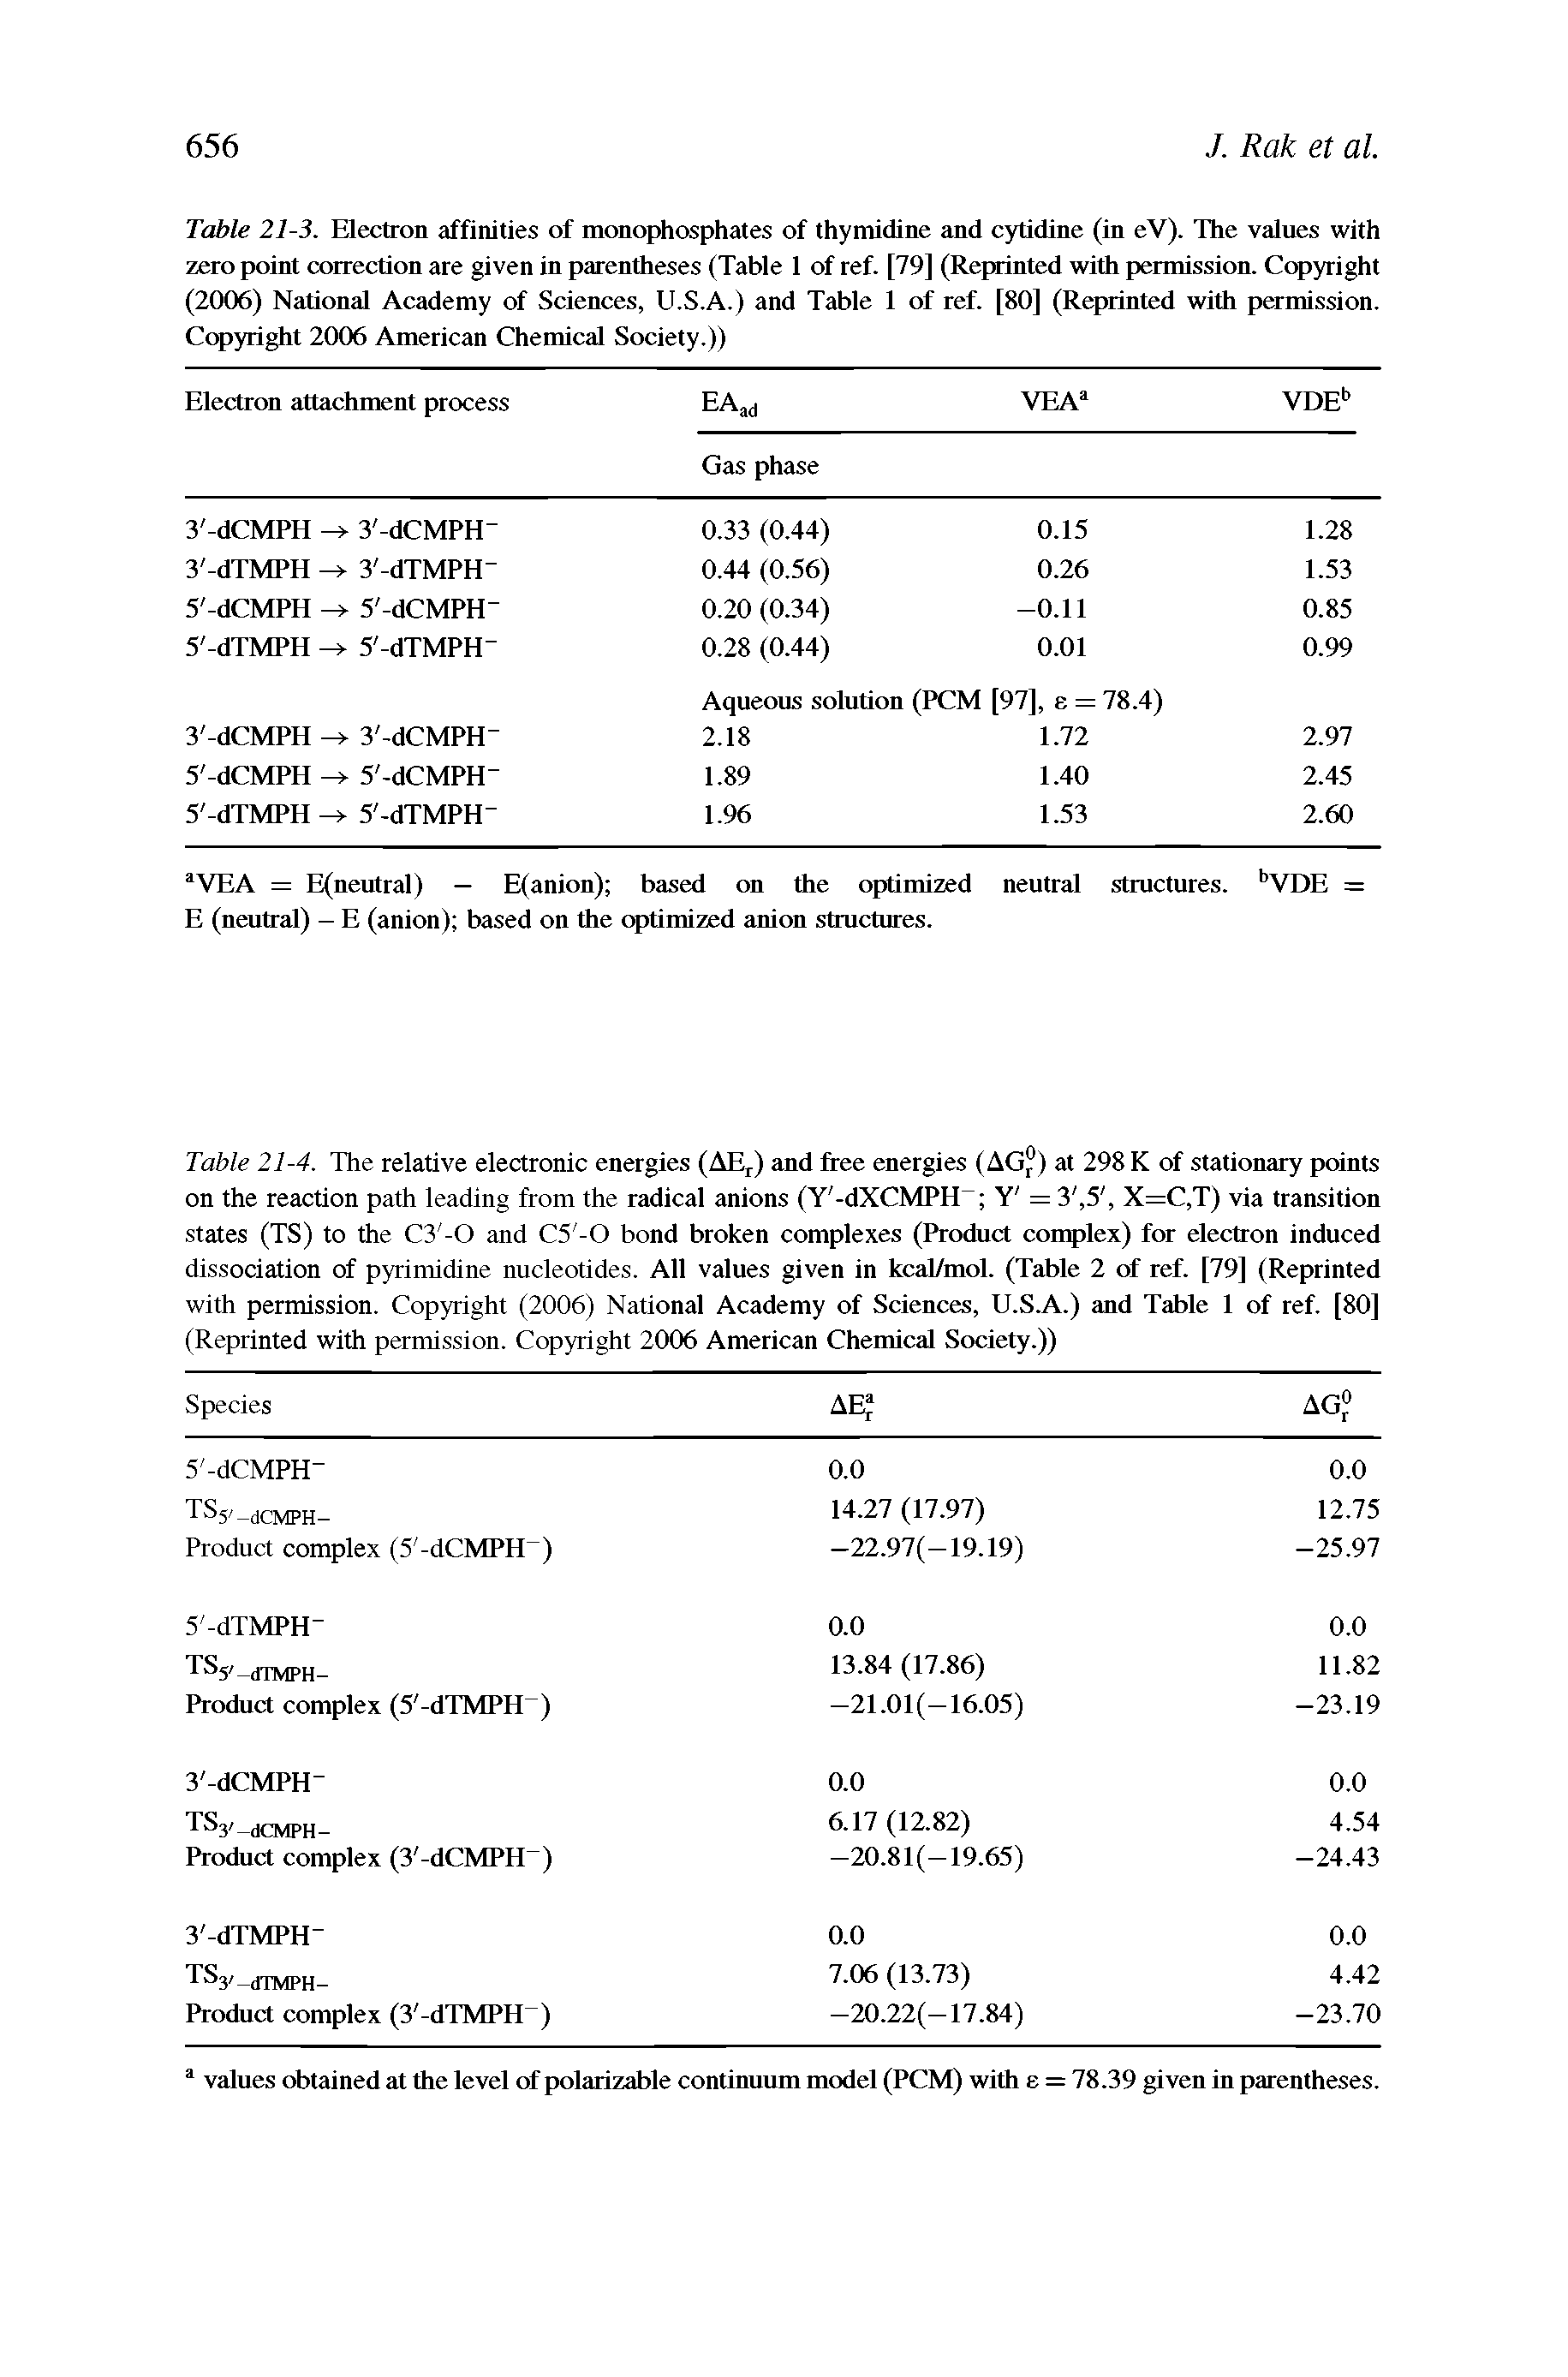 Table 21-4. The relative electronic energies (AEr) and free energies (A( I)) at 298 K of stationary points on the reaction path leading from the radical anions (Y -dXOMPII Y = 3, 5, X=C,T) via transition states (TS) to the C3 -0 and C5 -0 bond broken complexes (Product complex) for electron induced dissociation of pyrimidine nucleotides. All values given in kcal/mol. (Table 2 of ref. [79] (Reprinted with permission. Copyright (2006) National Academy of Sciences, U.S.A.) and Table 1 of ref. [80] (Reprinted with permission. Copyright 2006 American Chemical Society.))...